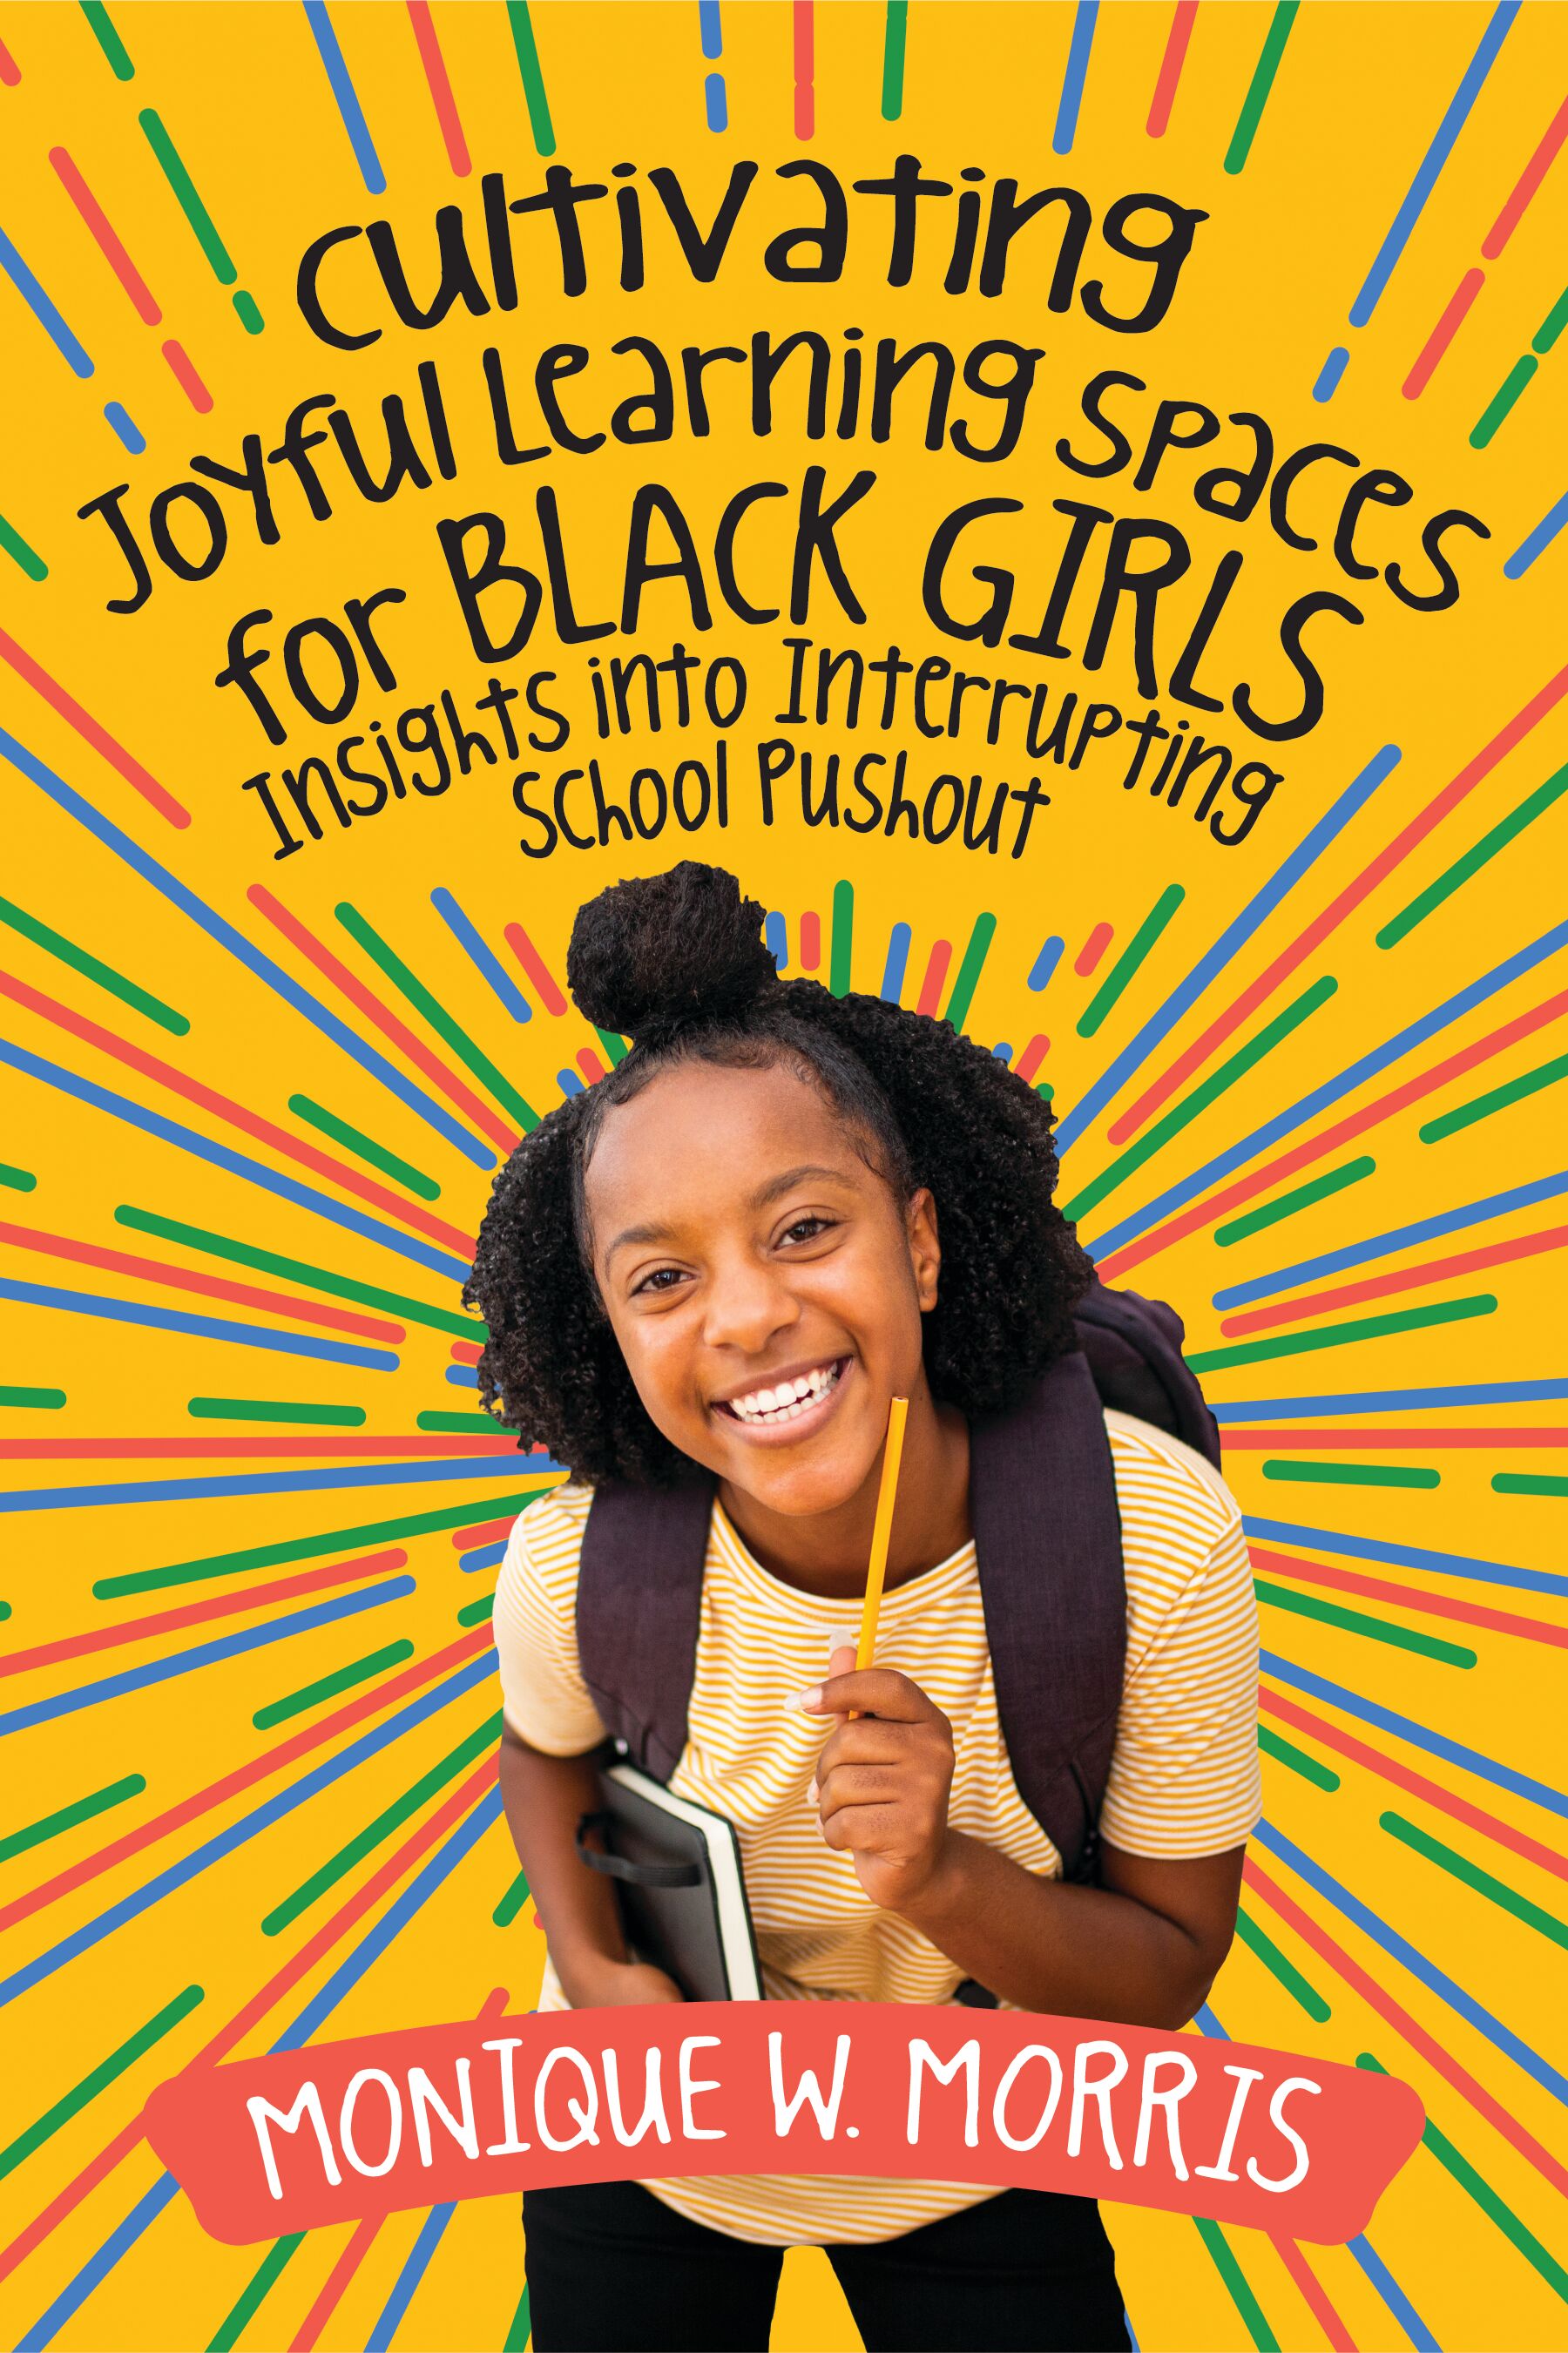 Cultivating Joyful Learning Spaces for Black Girls: Insights into